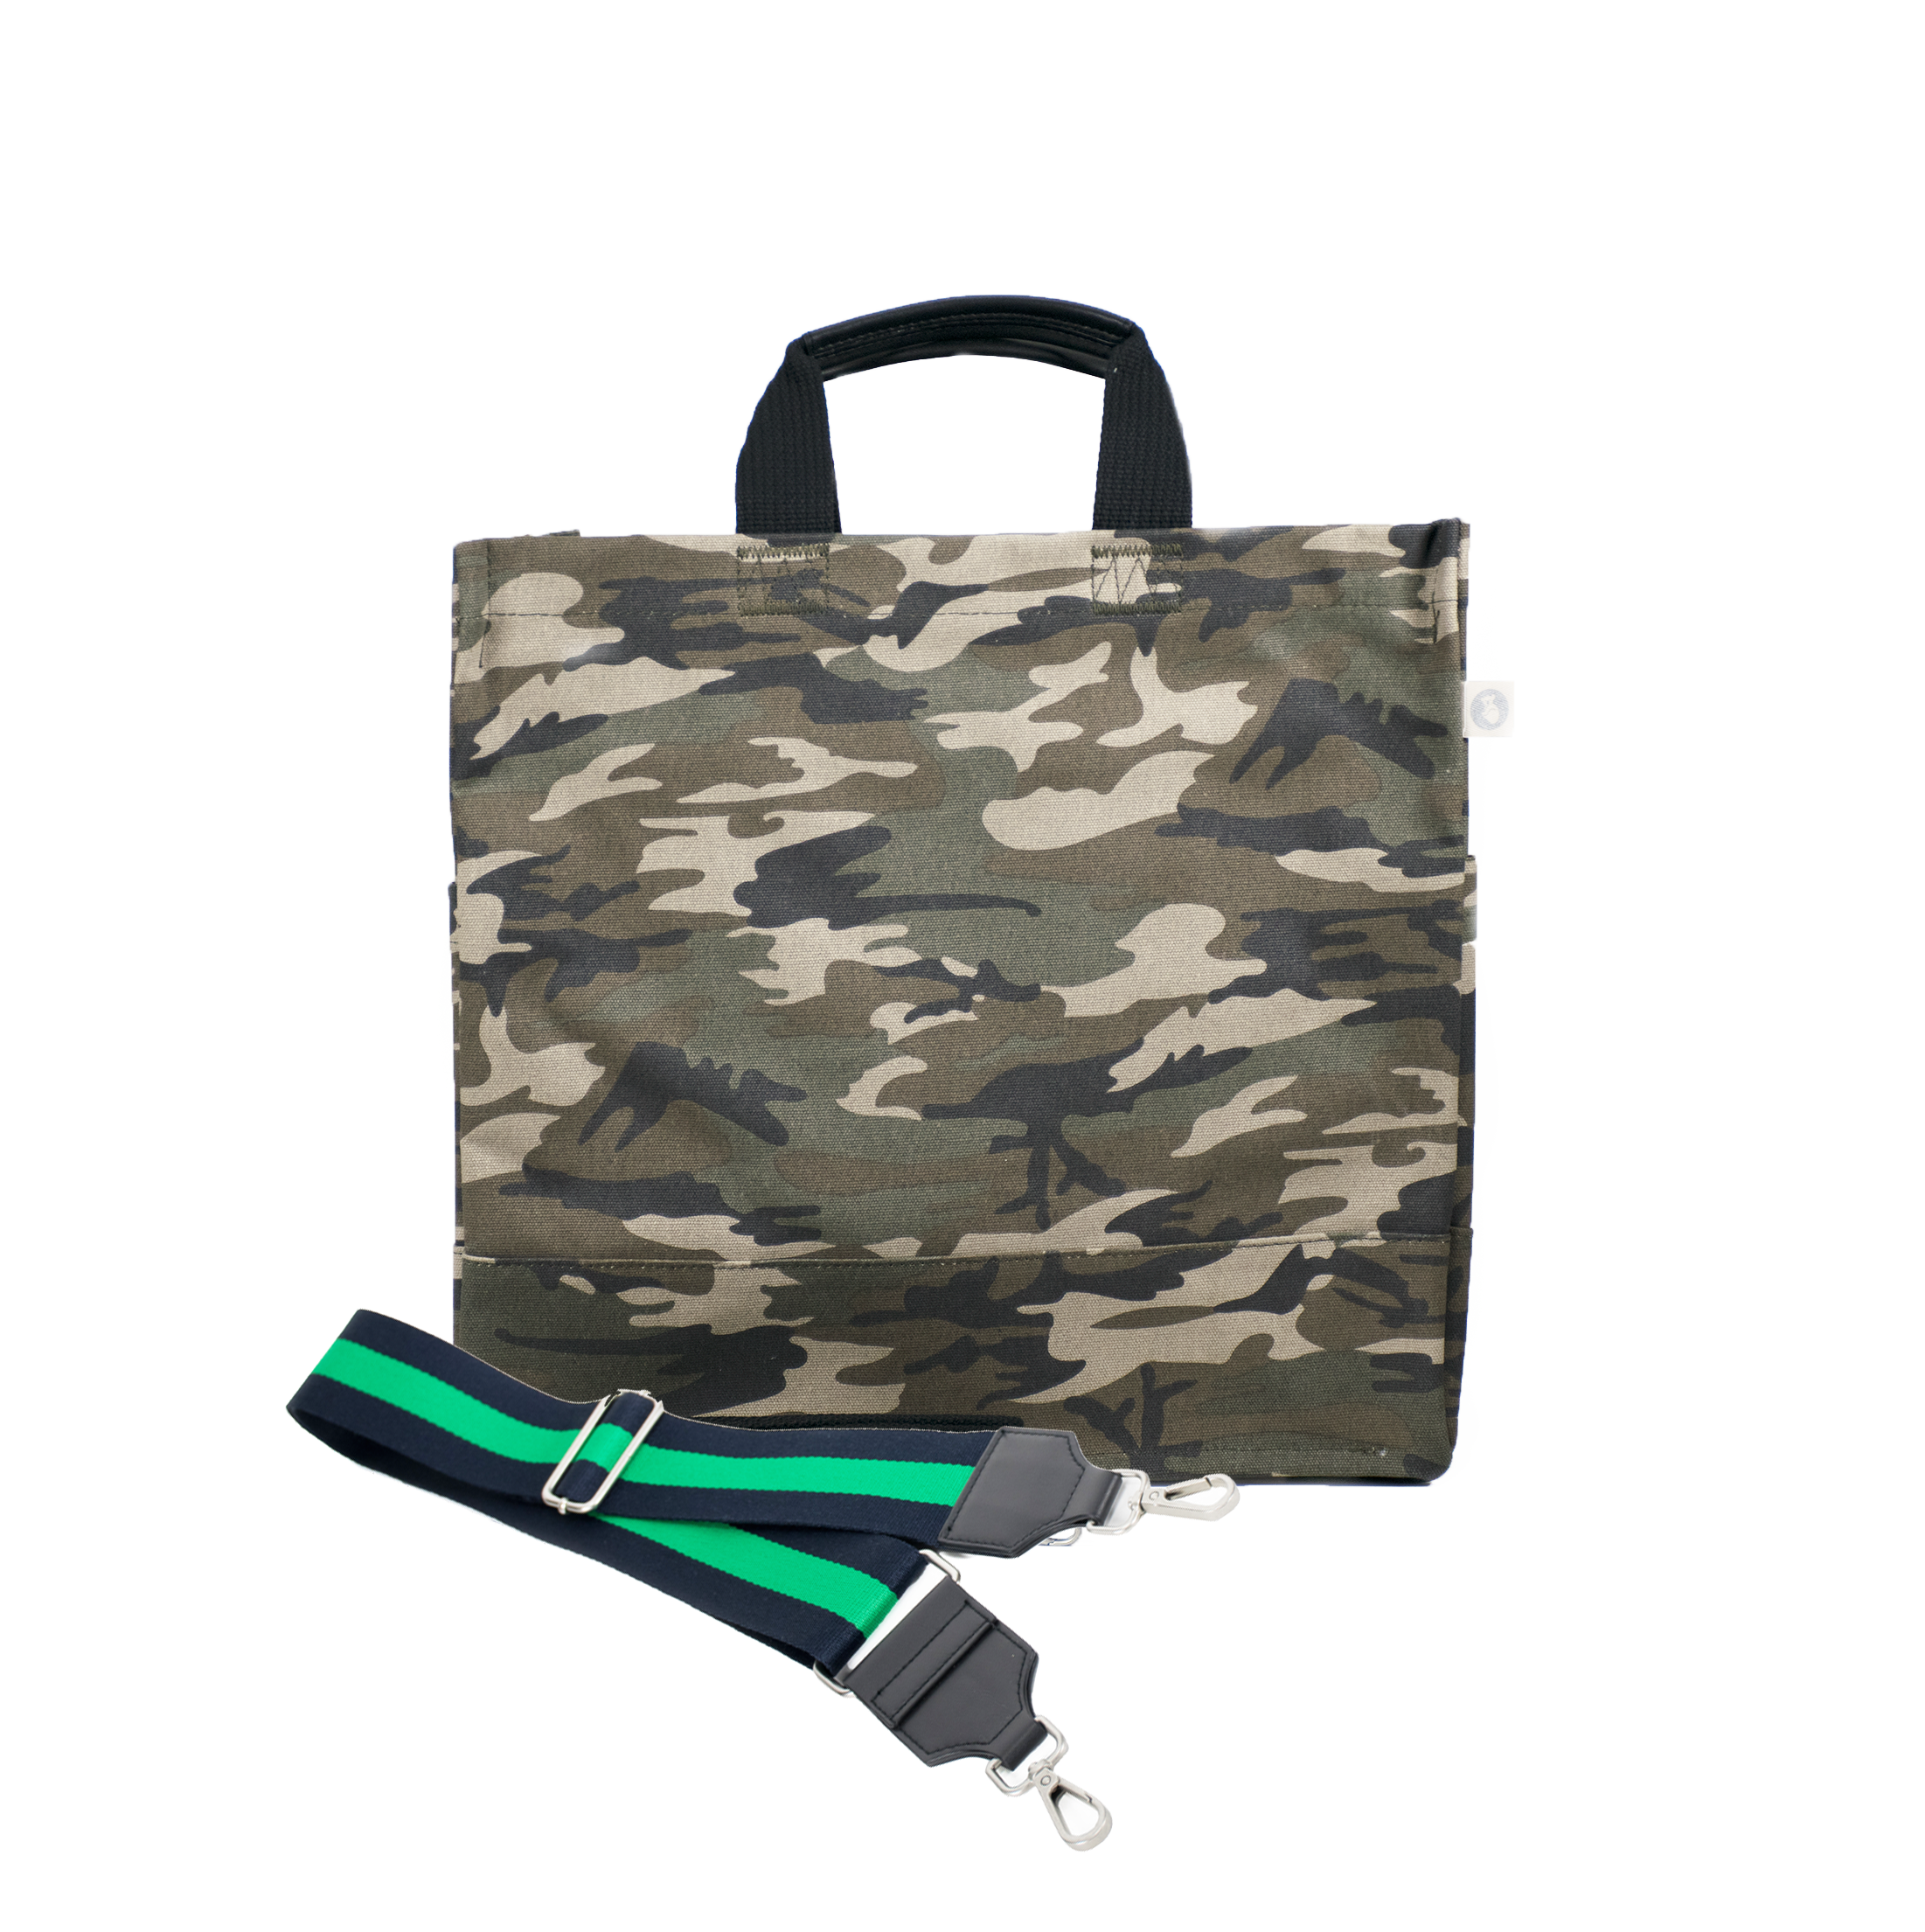 Split Letter Monogram Green Camo North South Bag with Stripe Strap - Quilted Koala